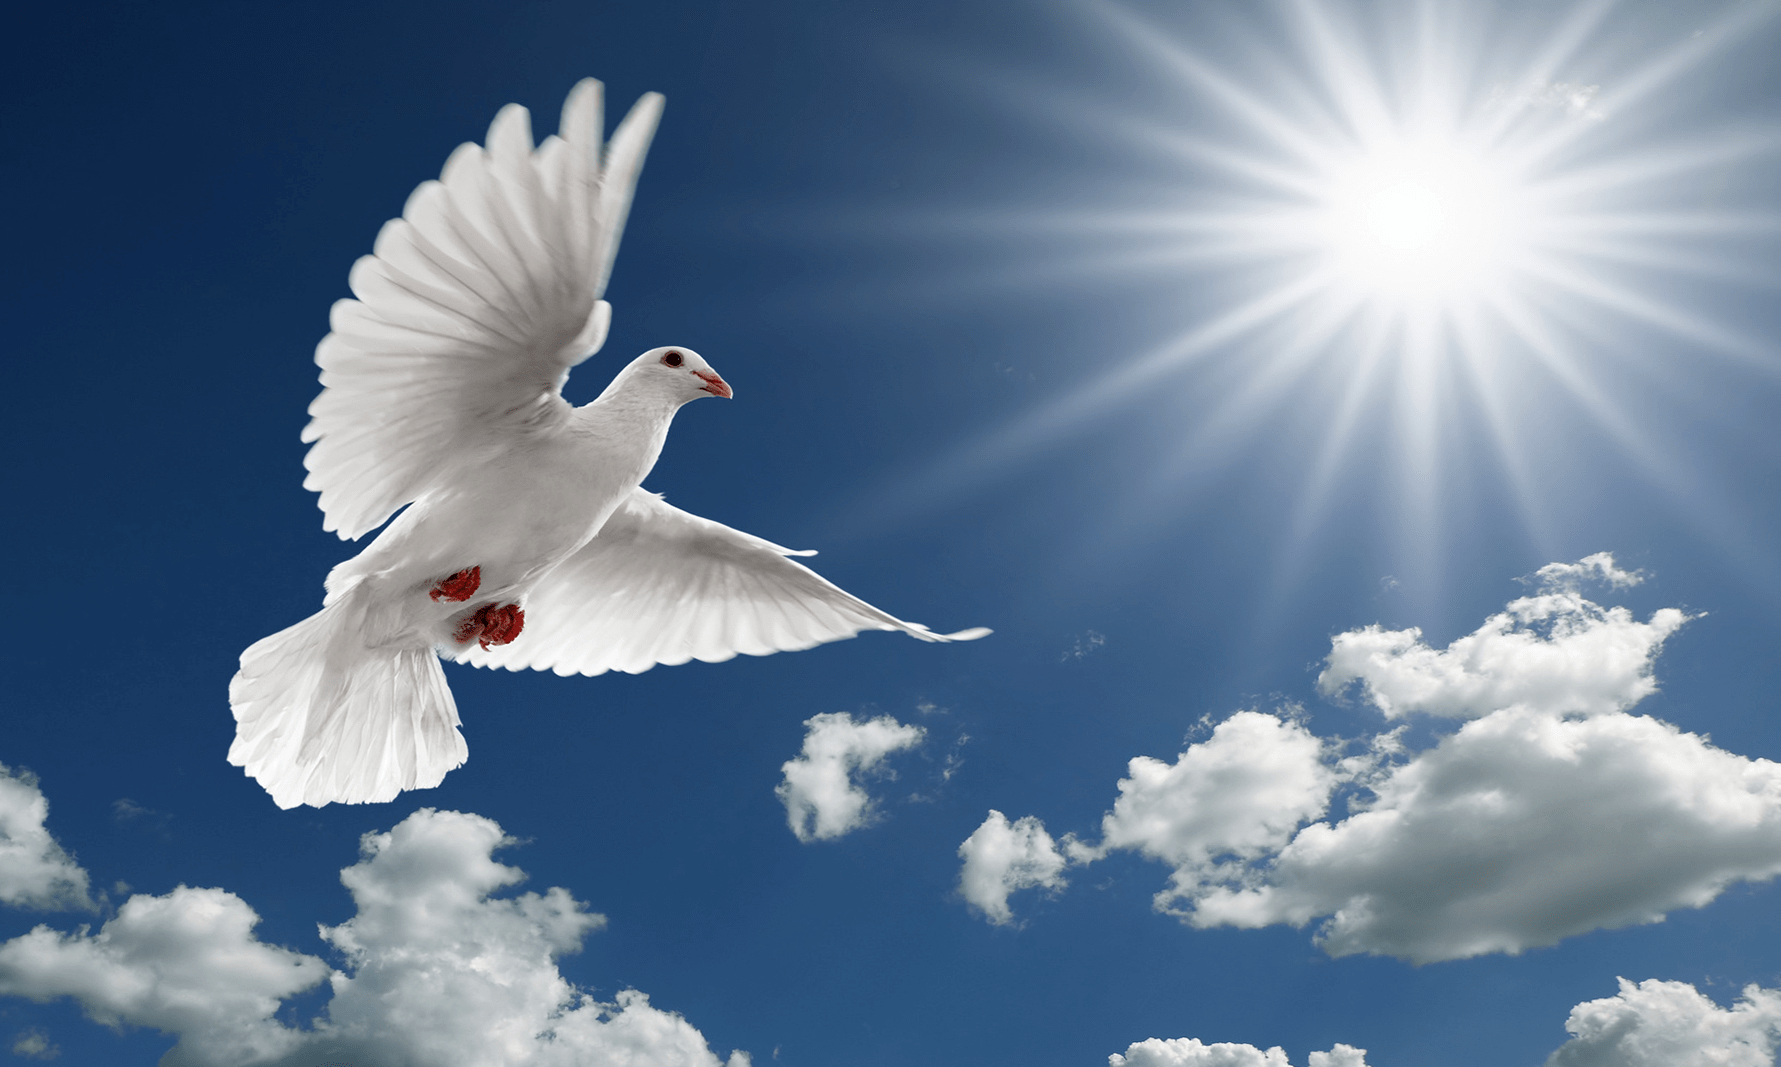 The Holy Spirit – Mission Springs Church of God